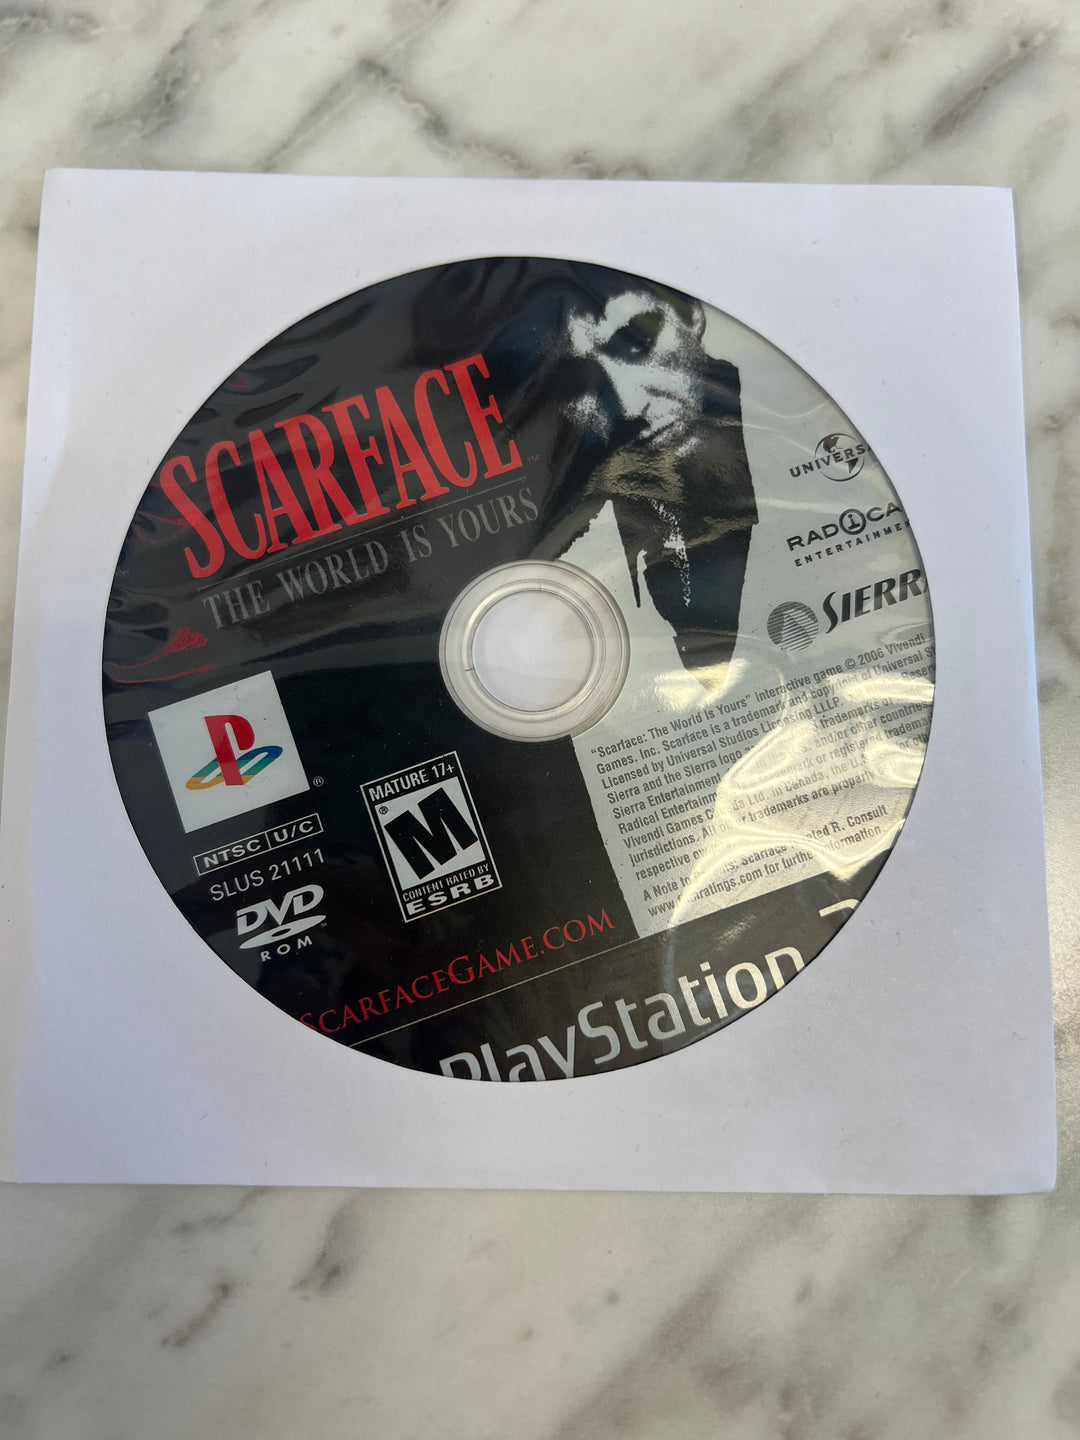 Scarface The World is Yours for PS2 Playstation 2 Disc Only No Case/Manual DU62724